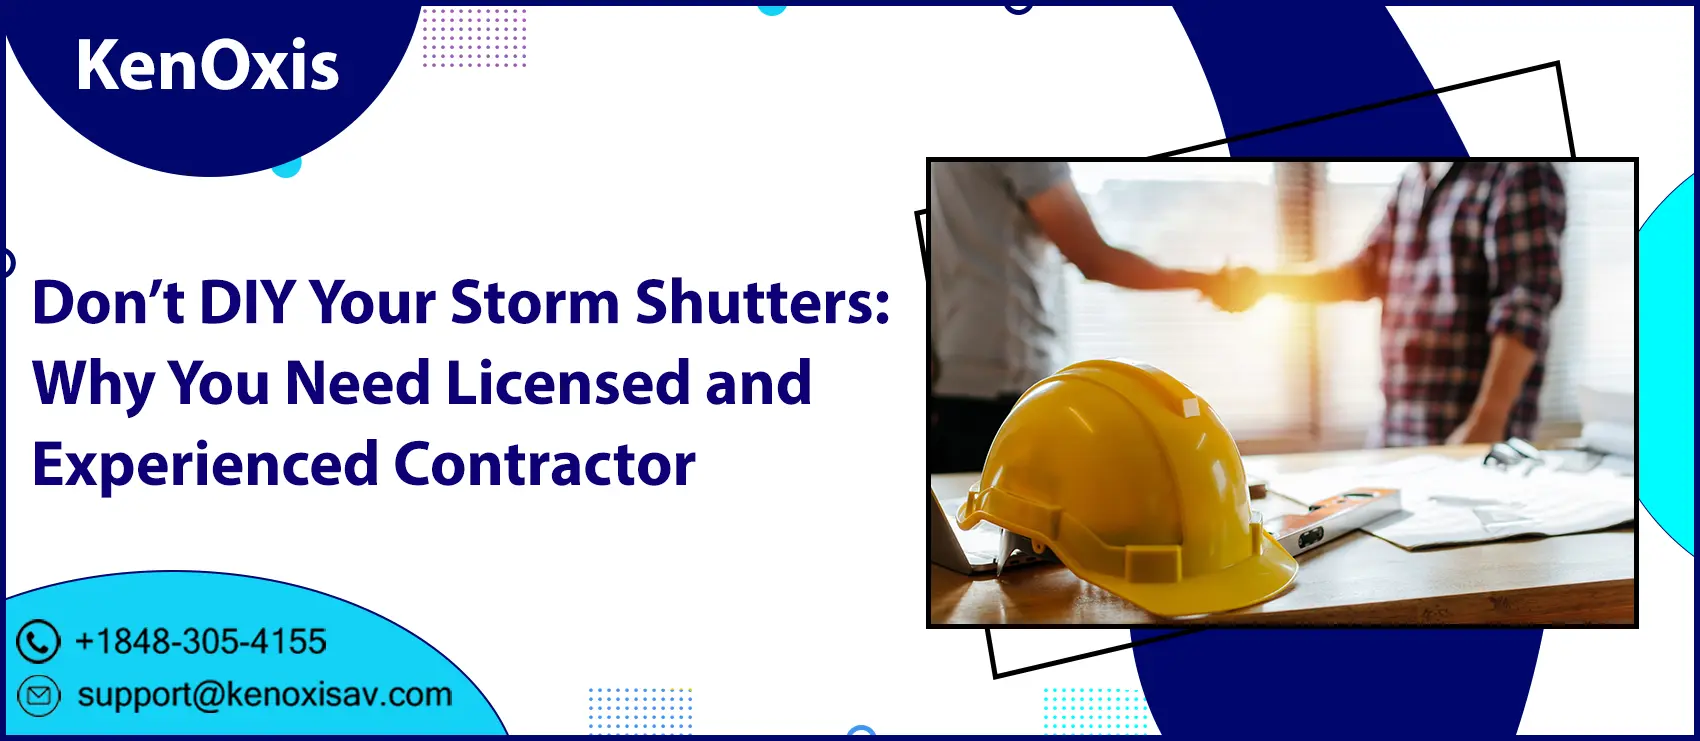 Don’t DIY Your Storm Shutters: Why You Need Licensed and Experienced Contractor